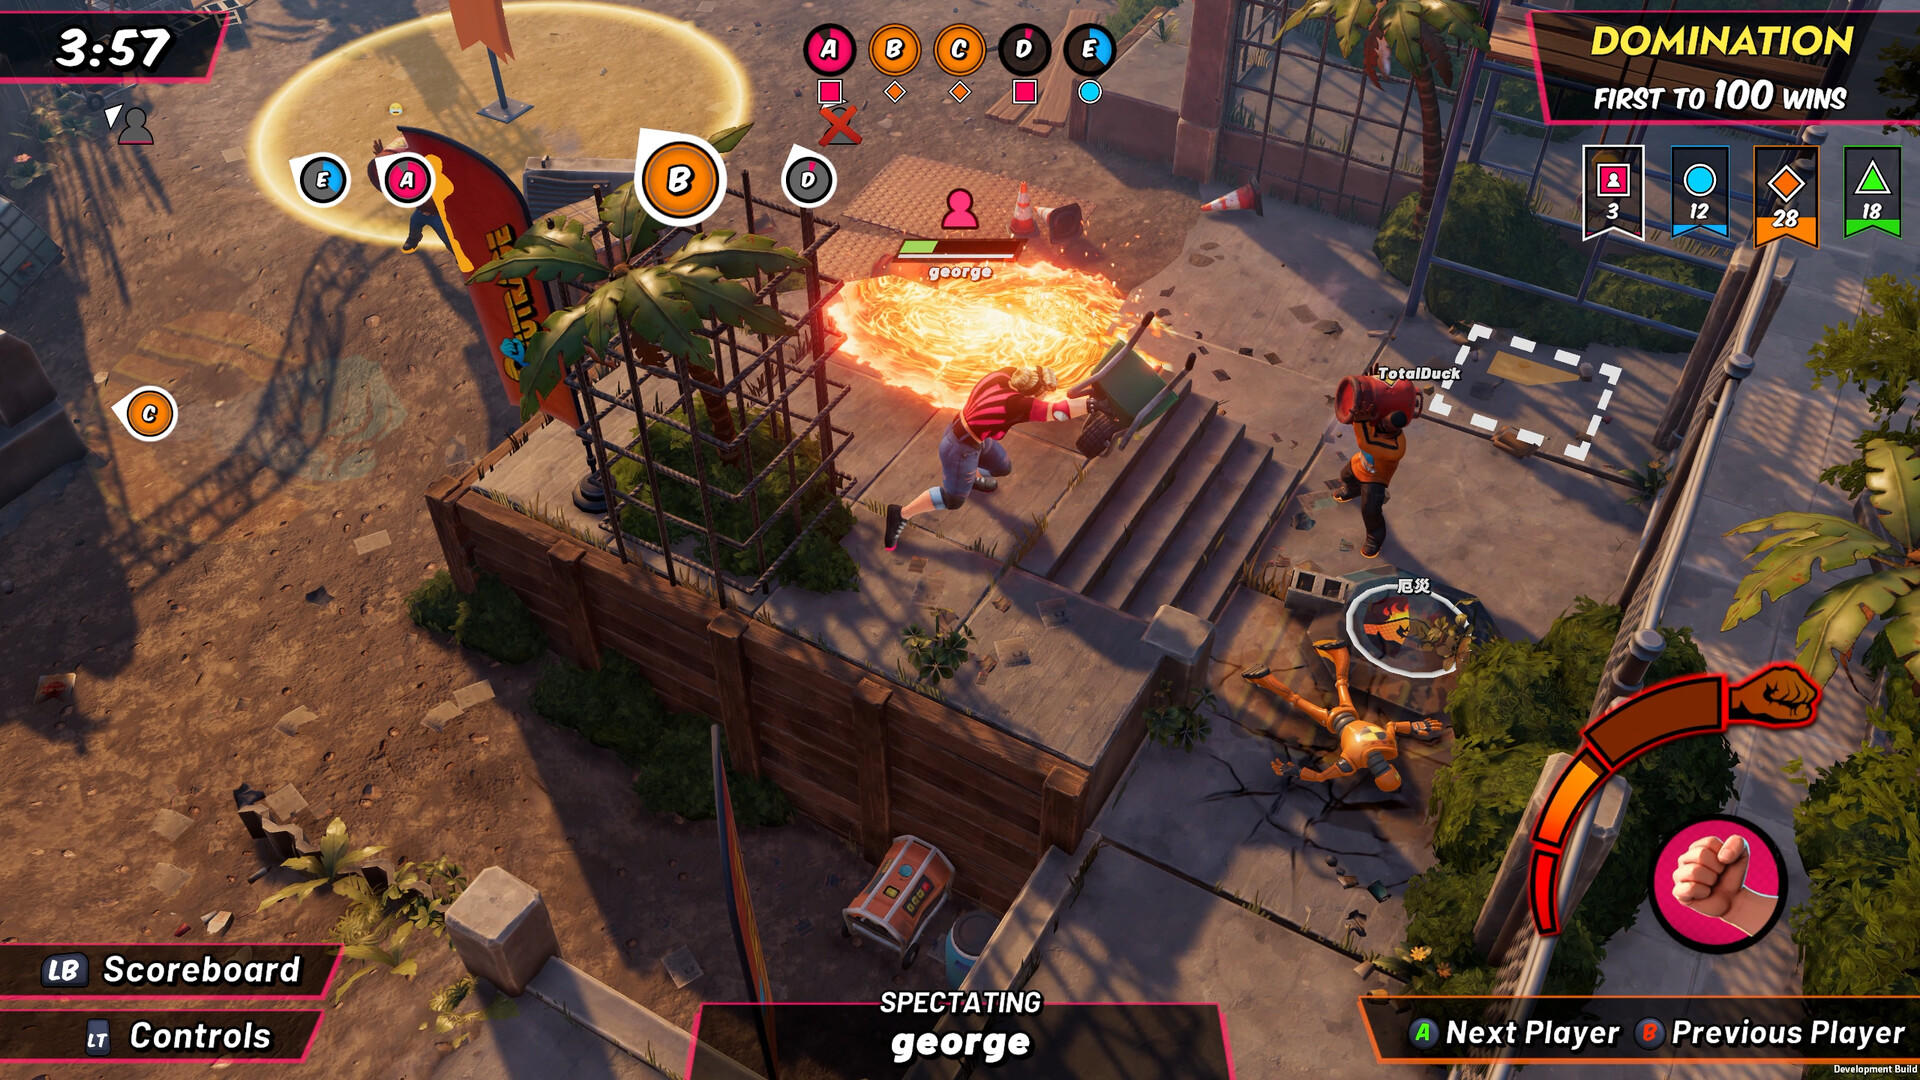 OutRage: Fight Fest screenshot game